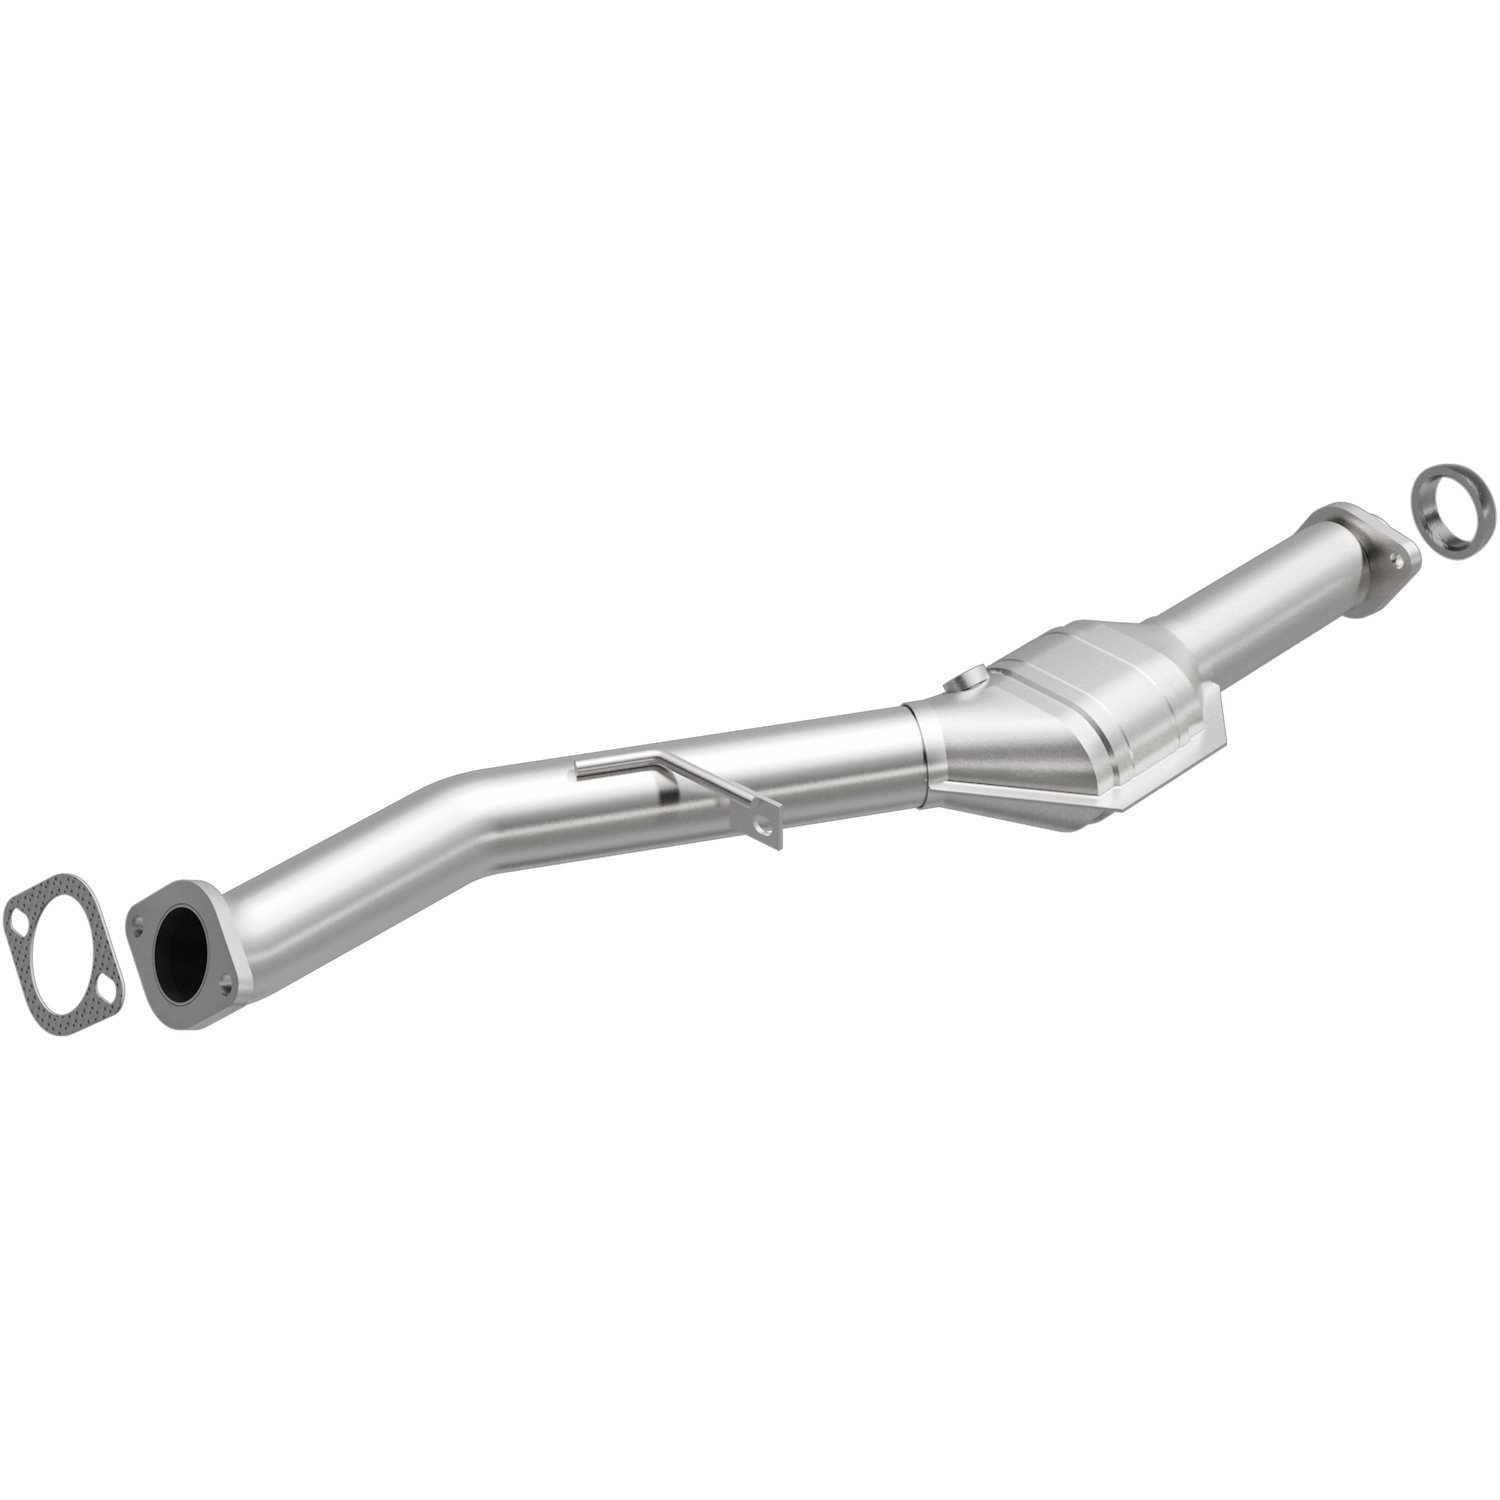 California Grade CARB Compliant Direct-Fit Catalytic Converter 5421012